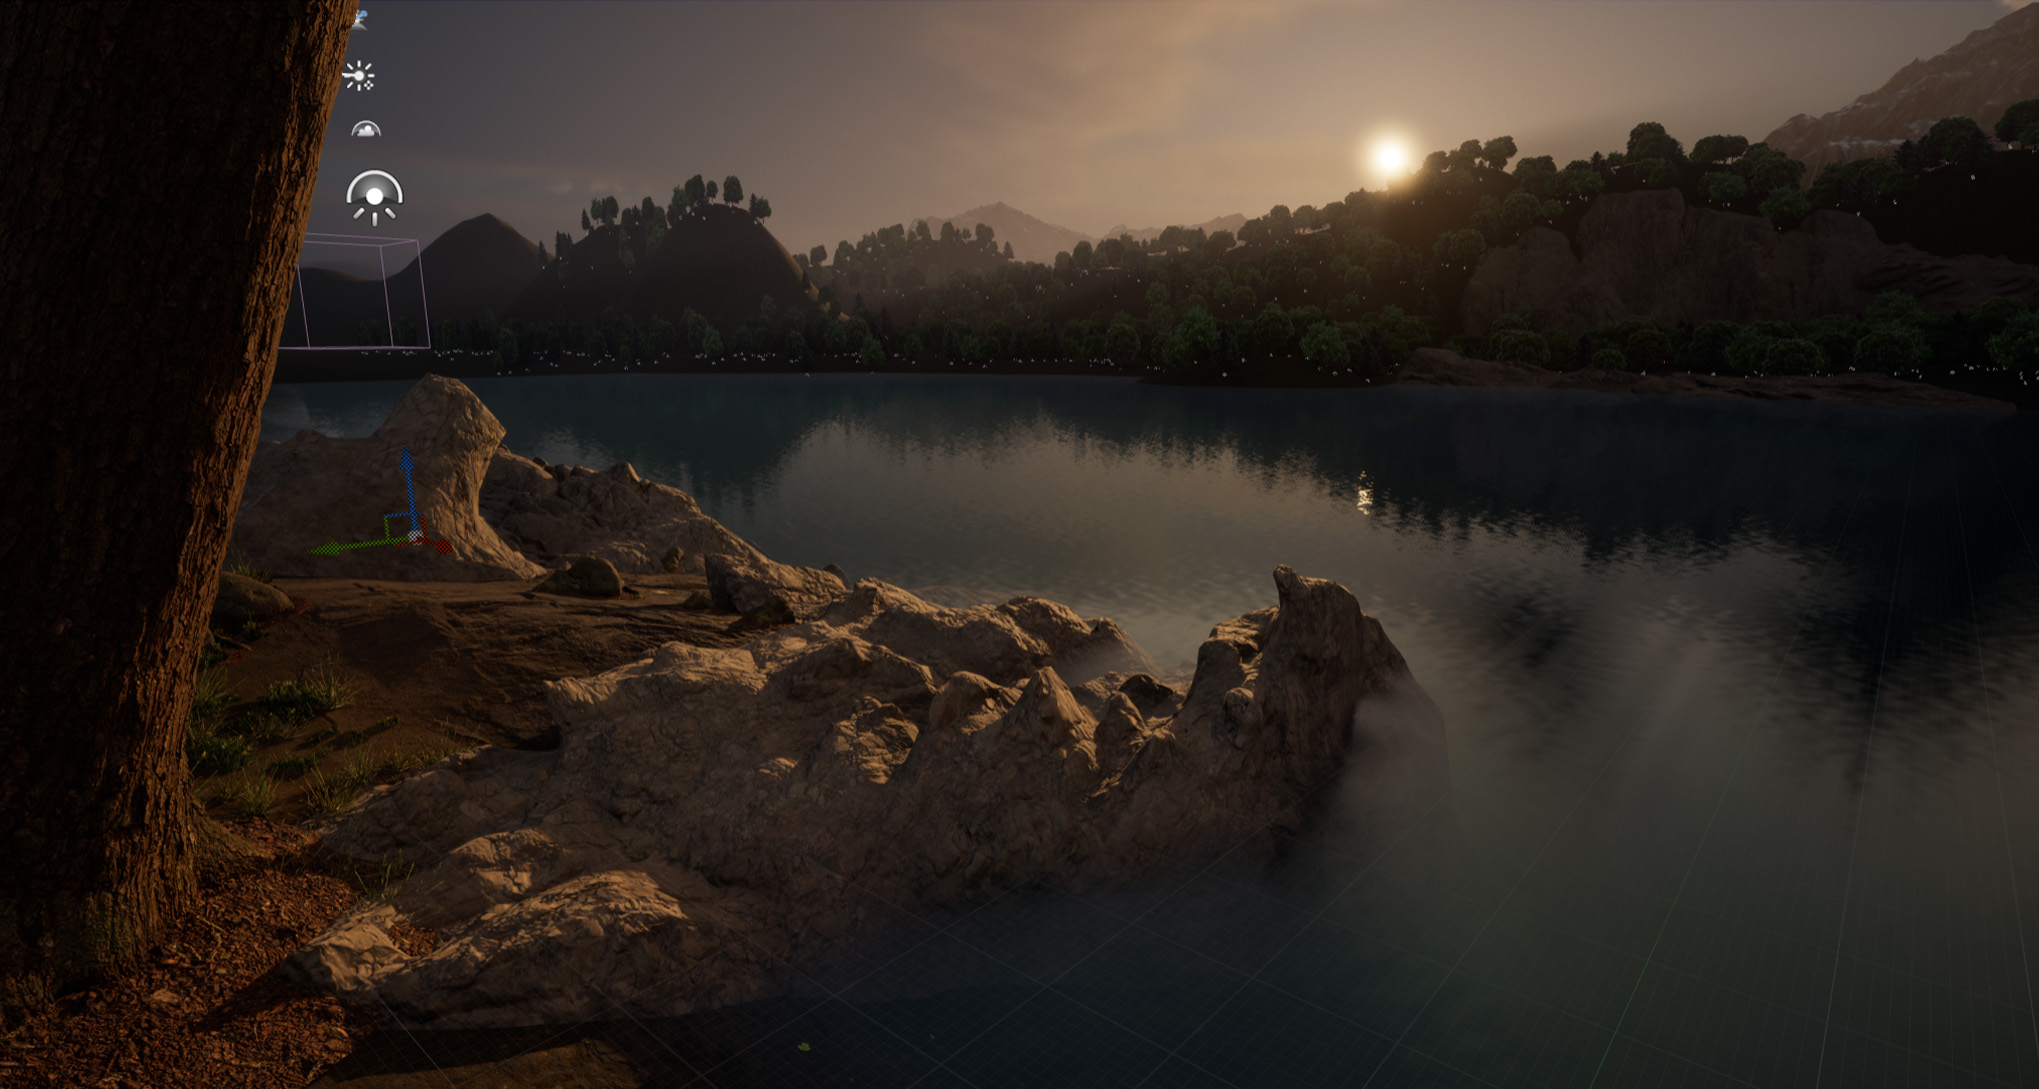 Perspective 1 of an environment created in the Unreal Engine